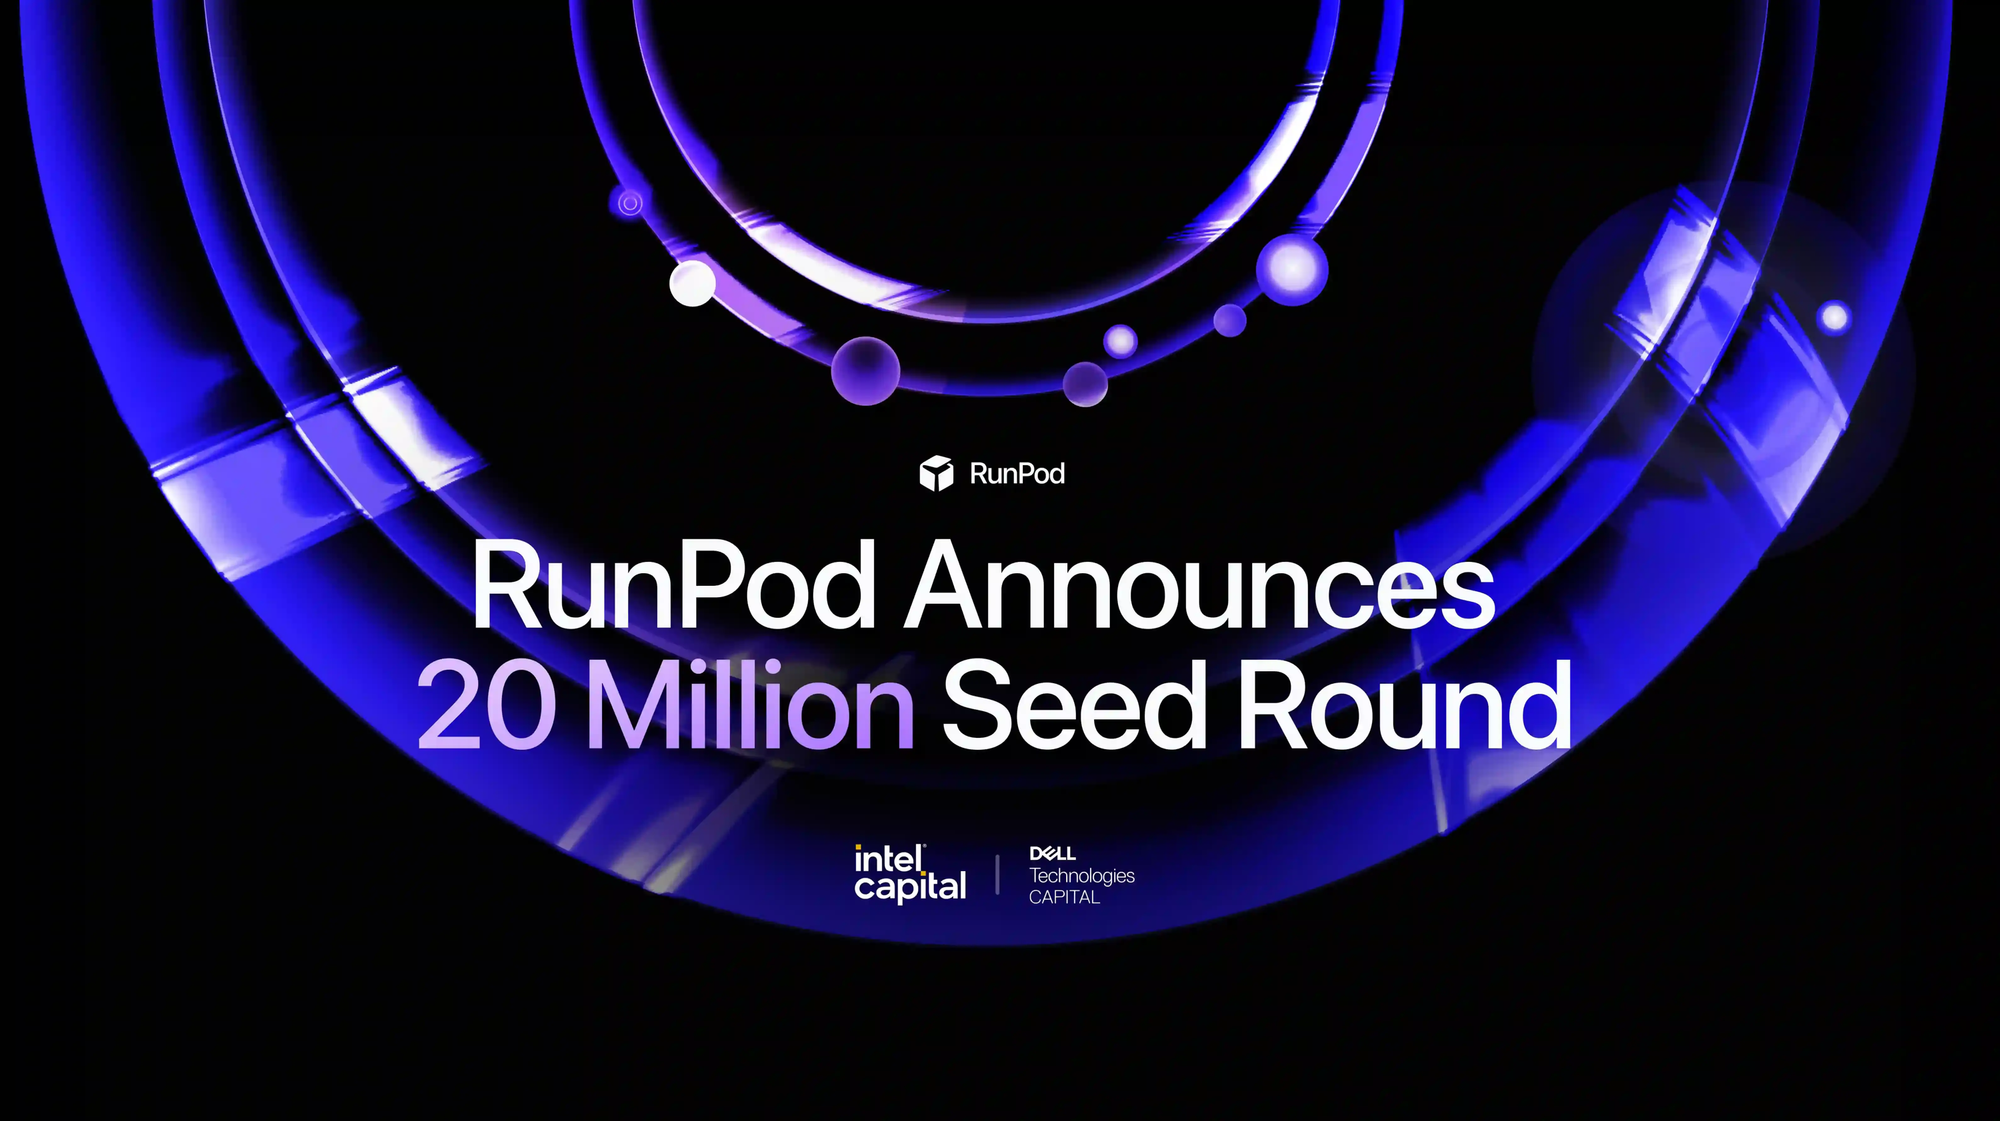 RunPod raised $20M in seed funding to accelerate its AI/ML workload platform